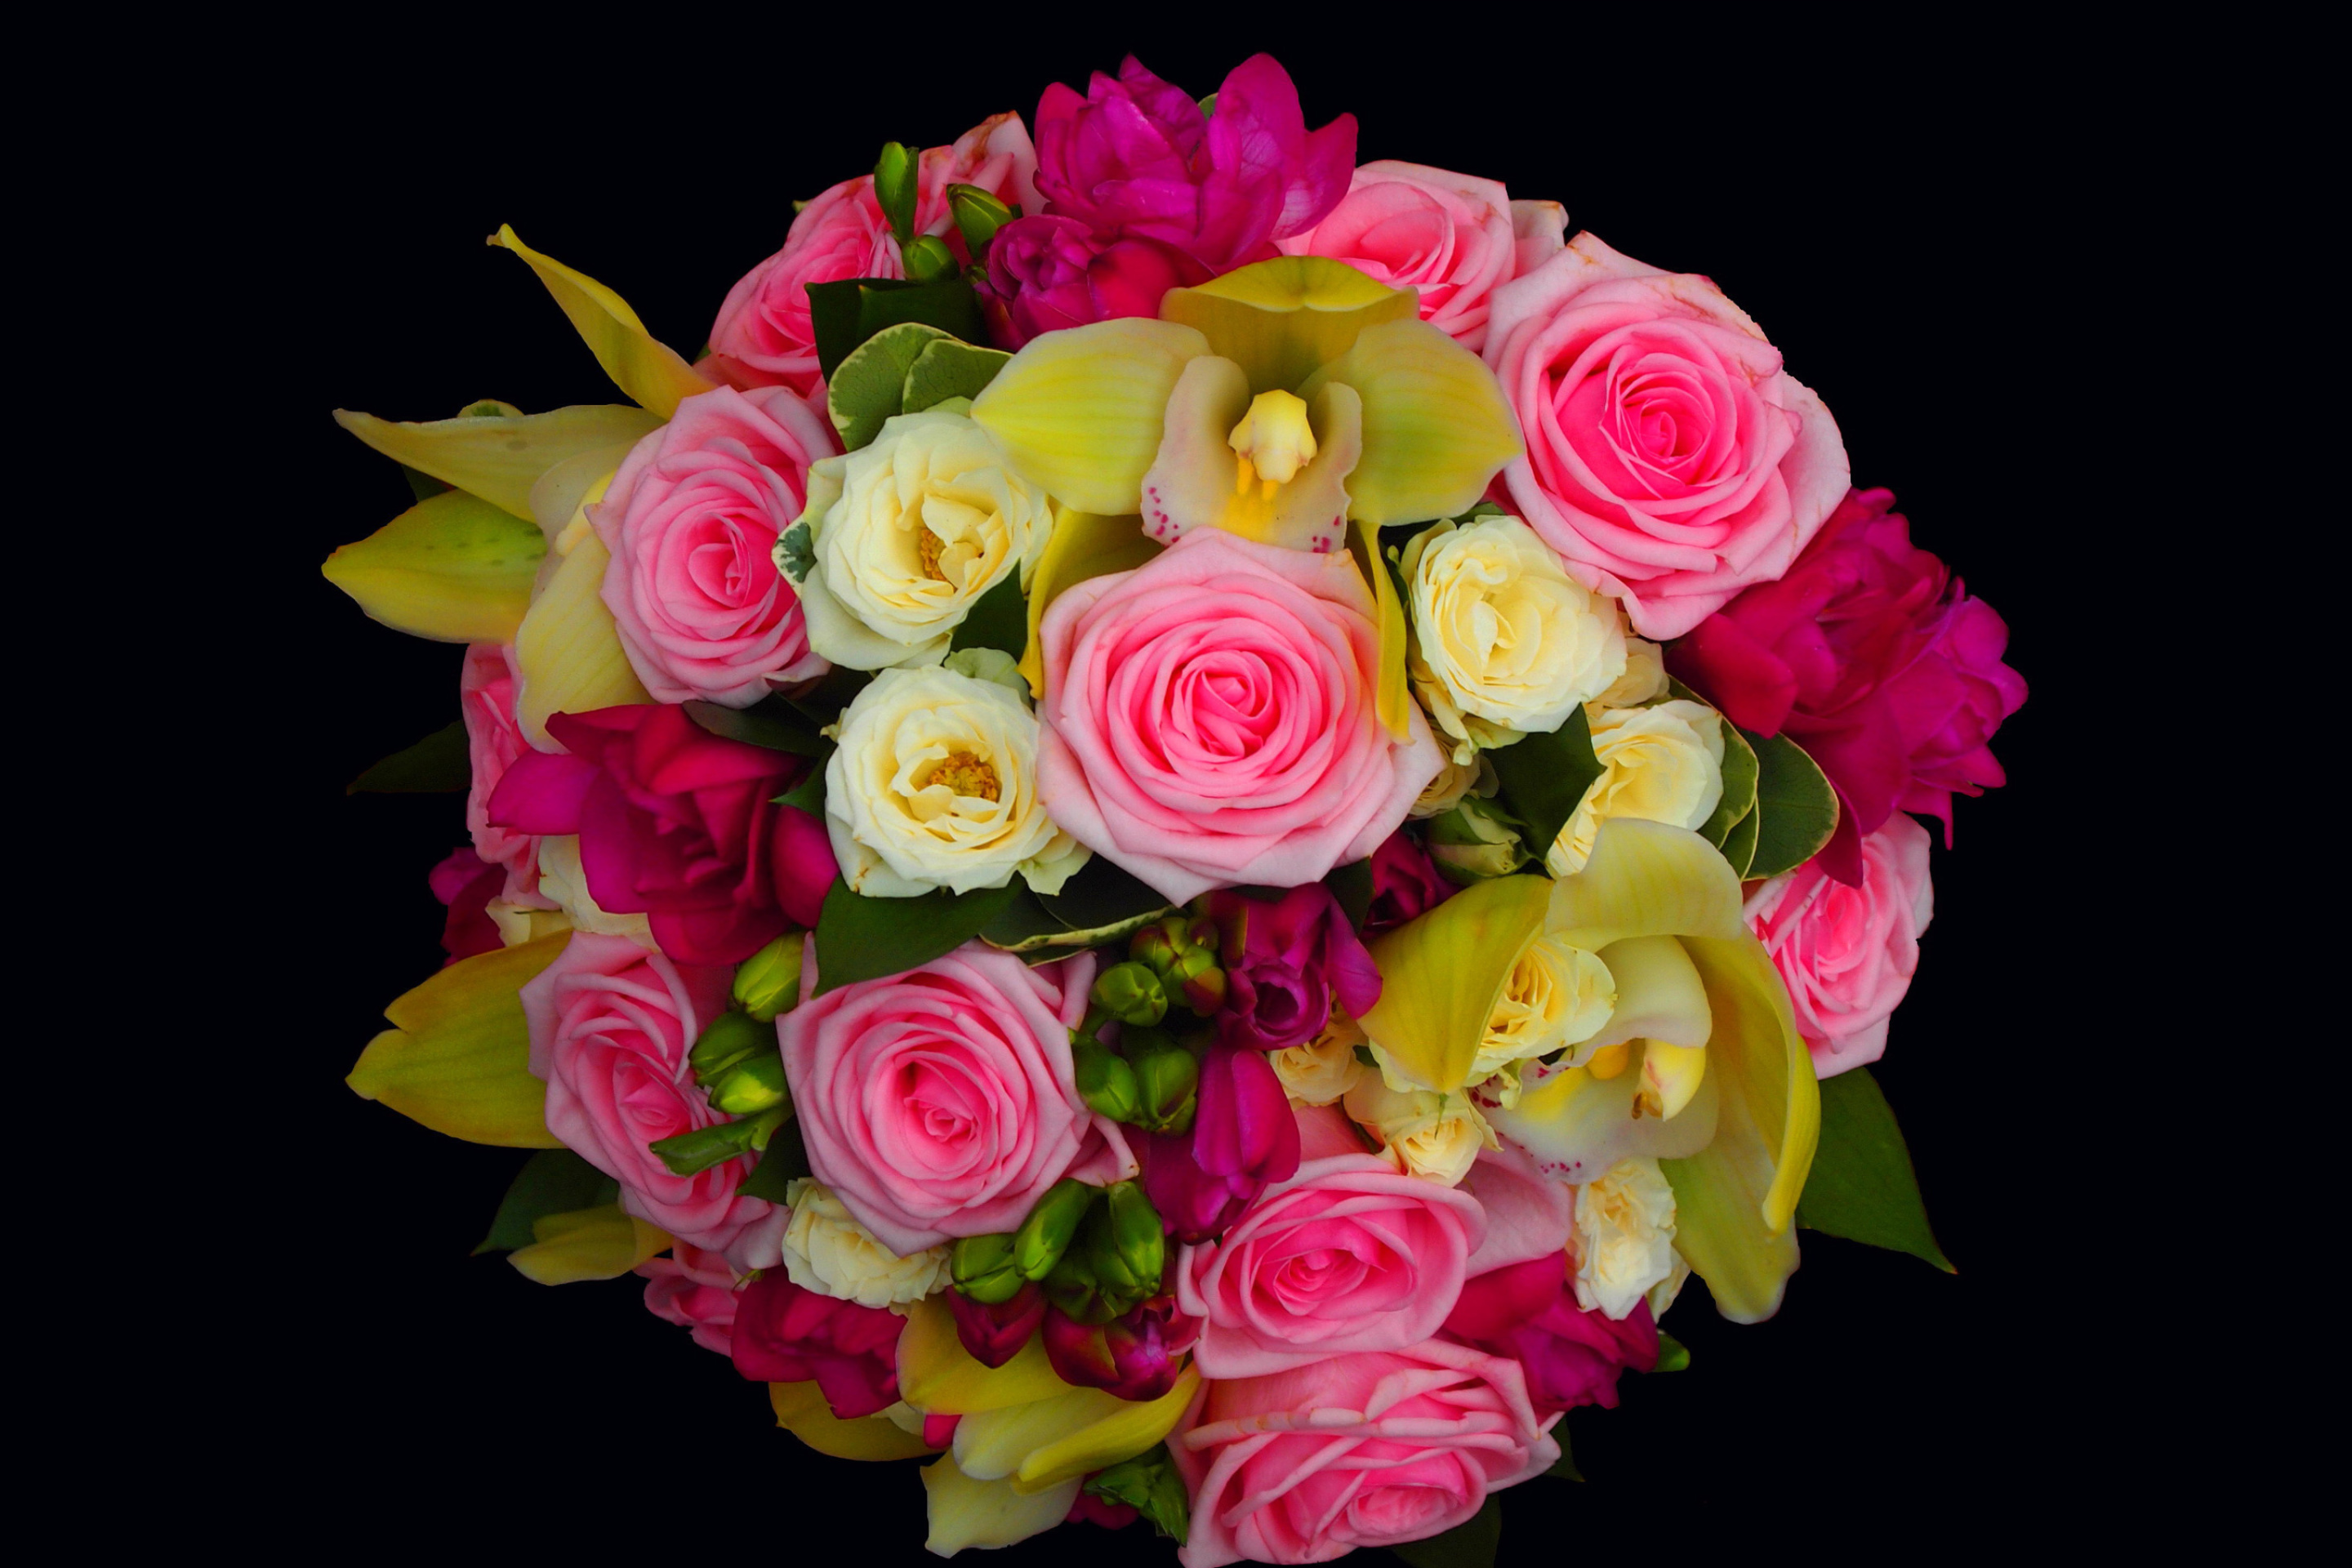 Bouquet of roses and yellow orchid, floristry wallpaper 2880x1920